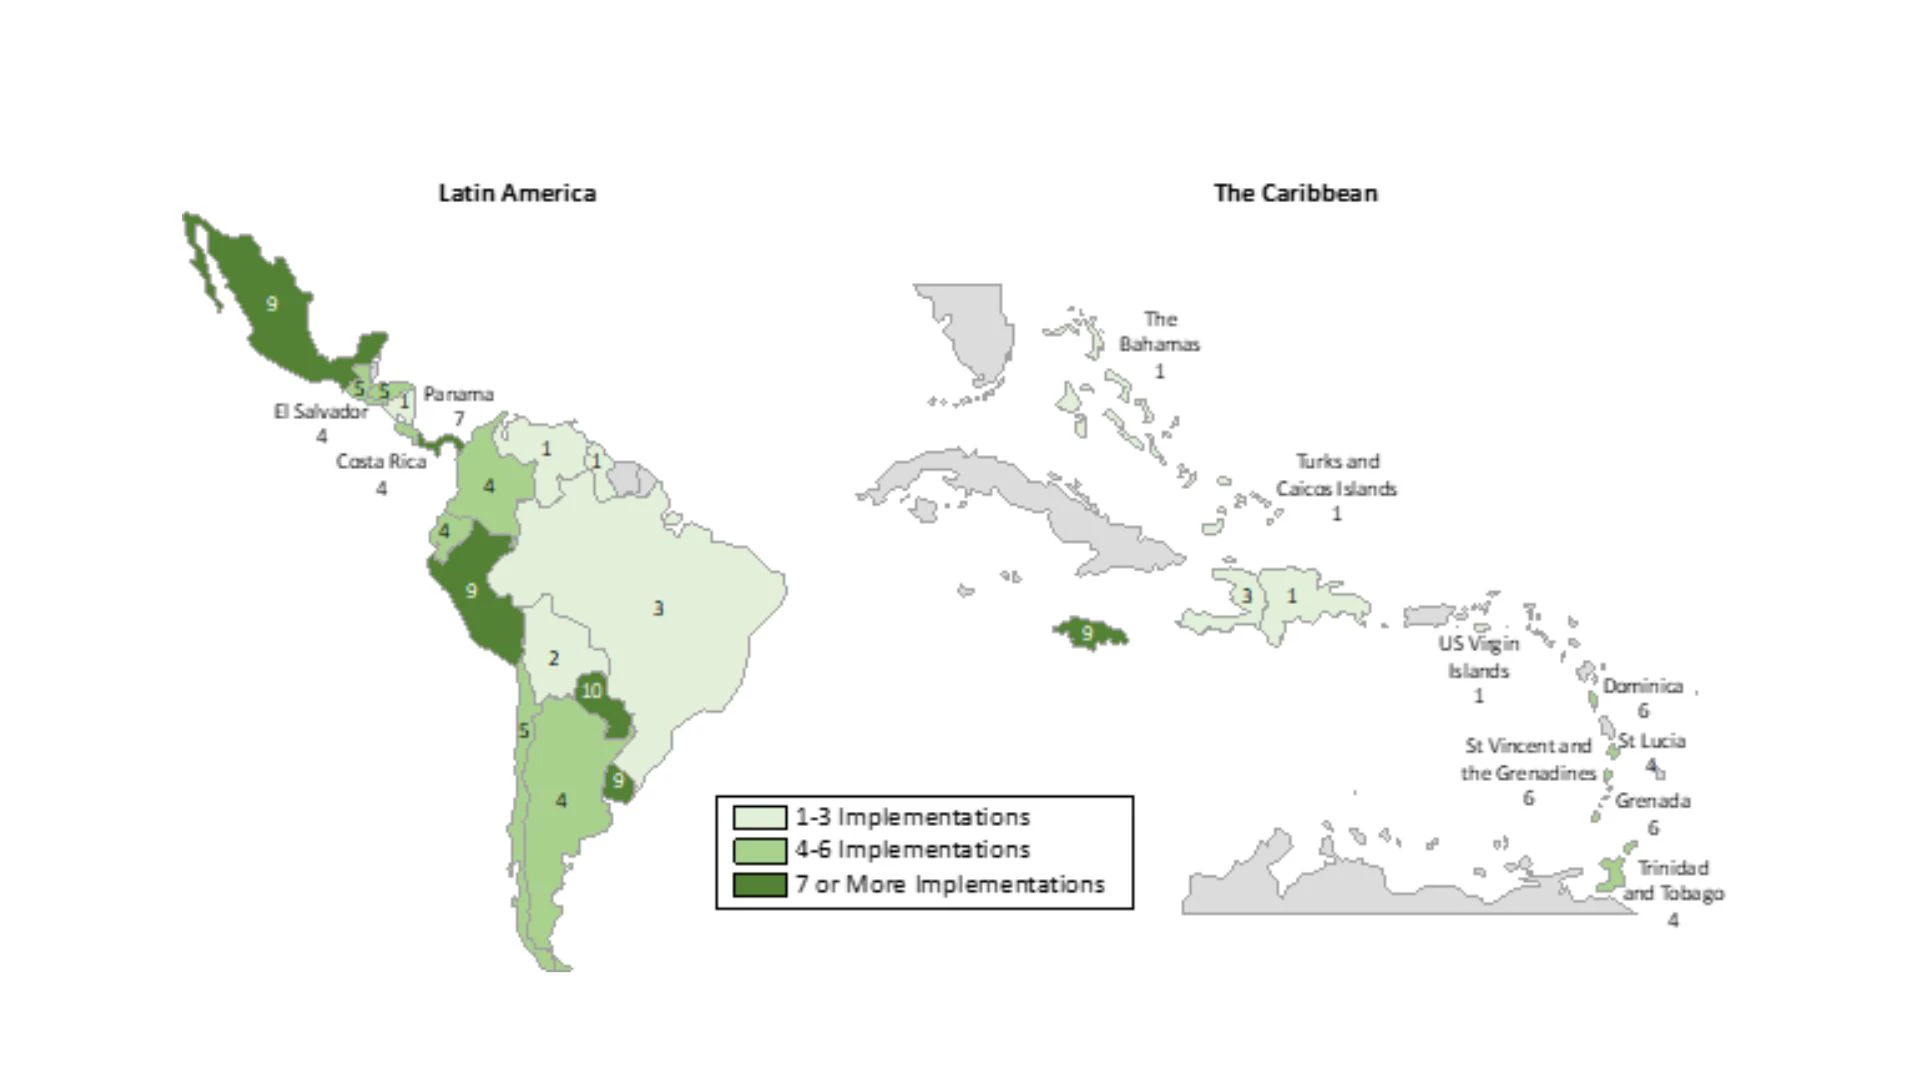 Figure 1. Number of eGP Modules Implemented in the LAC region